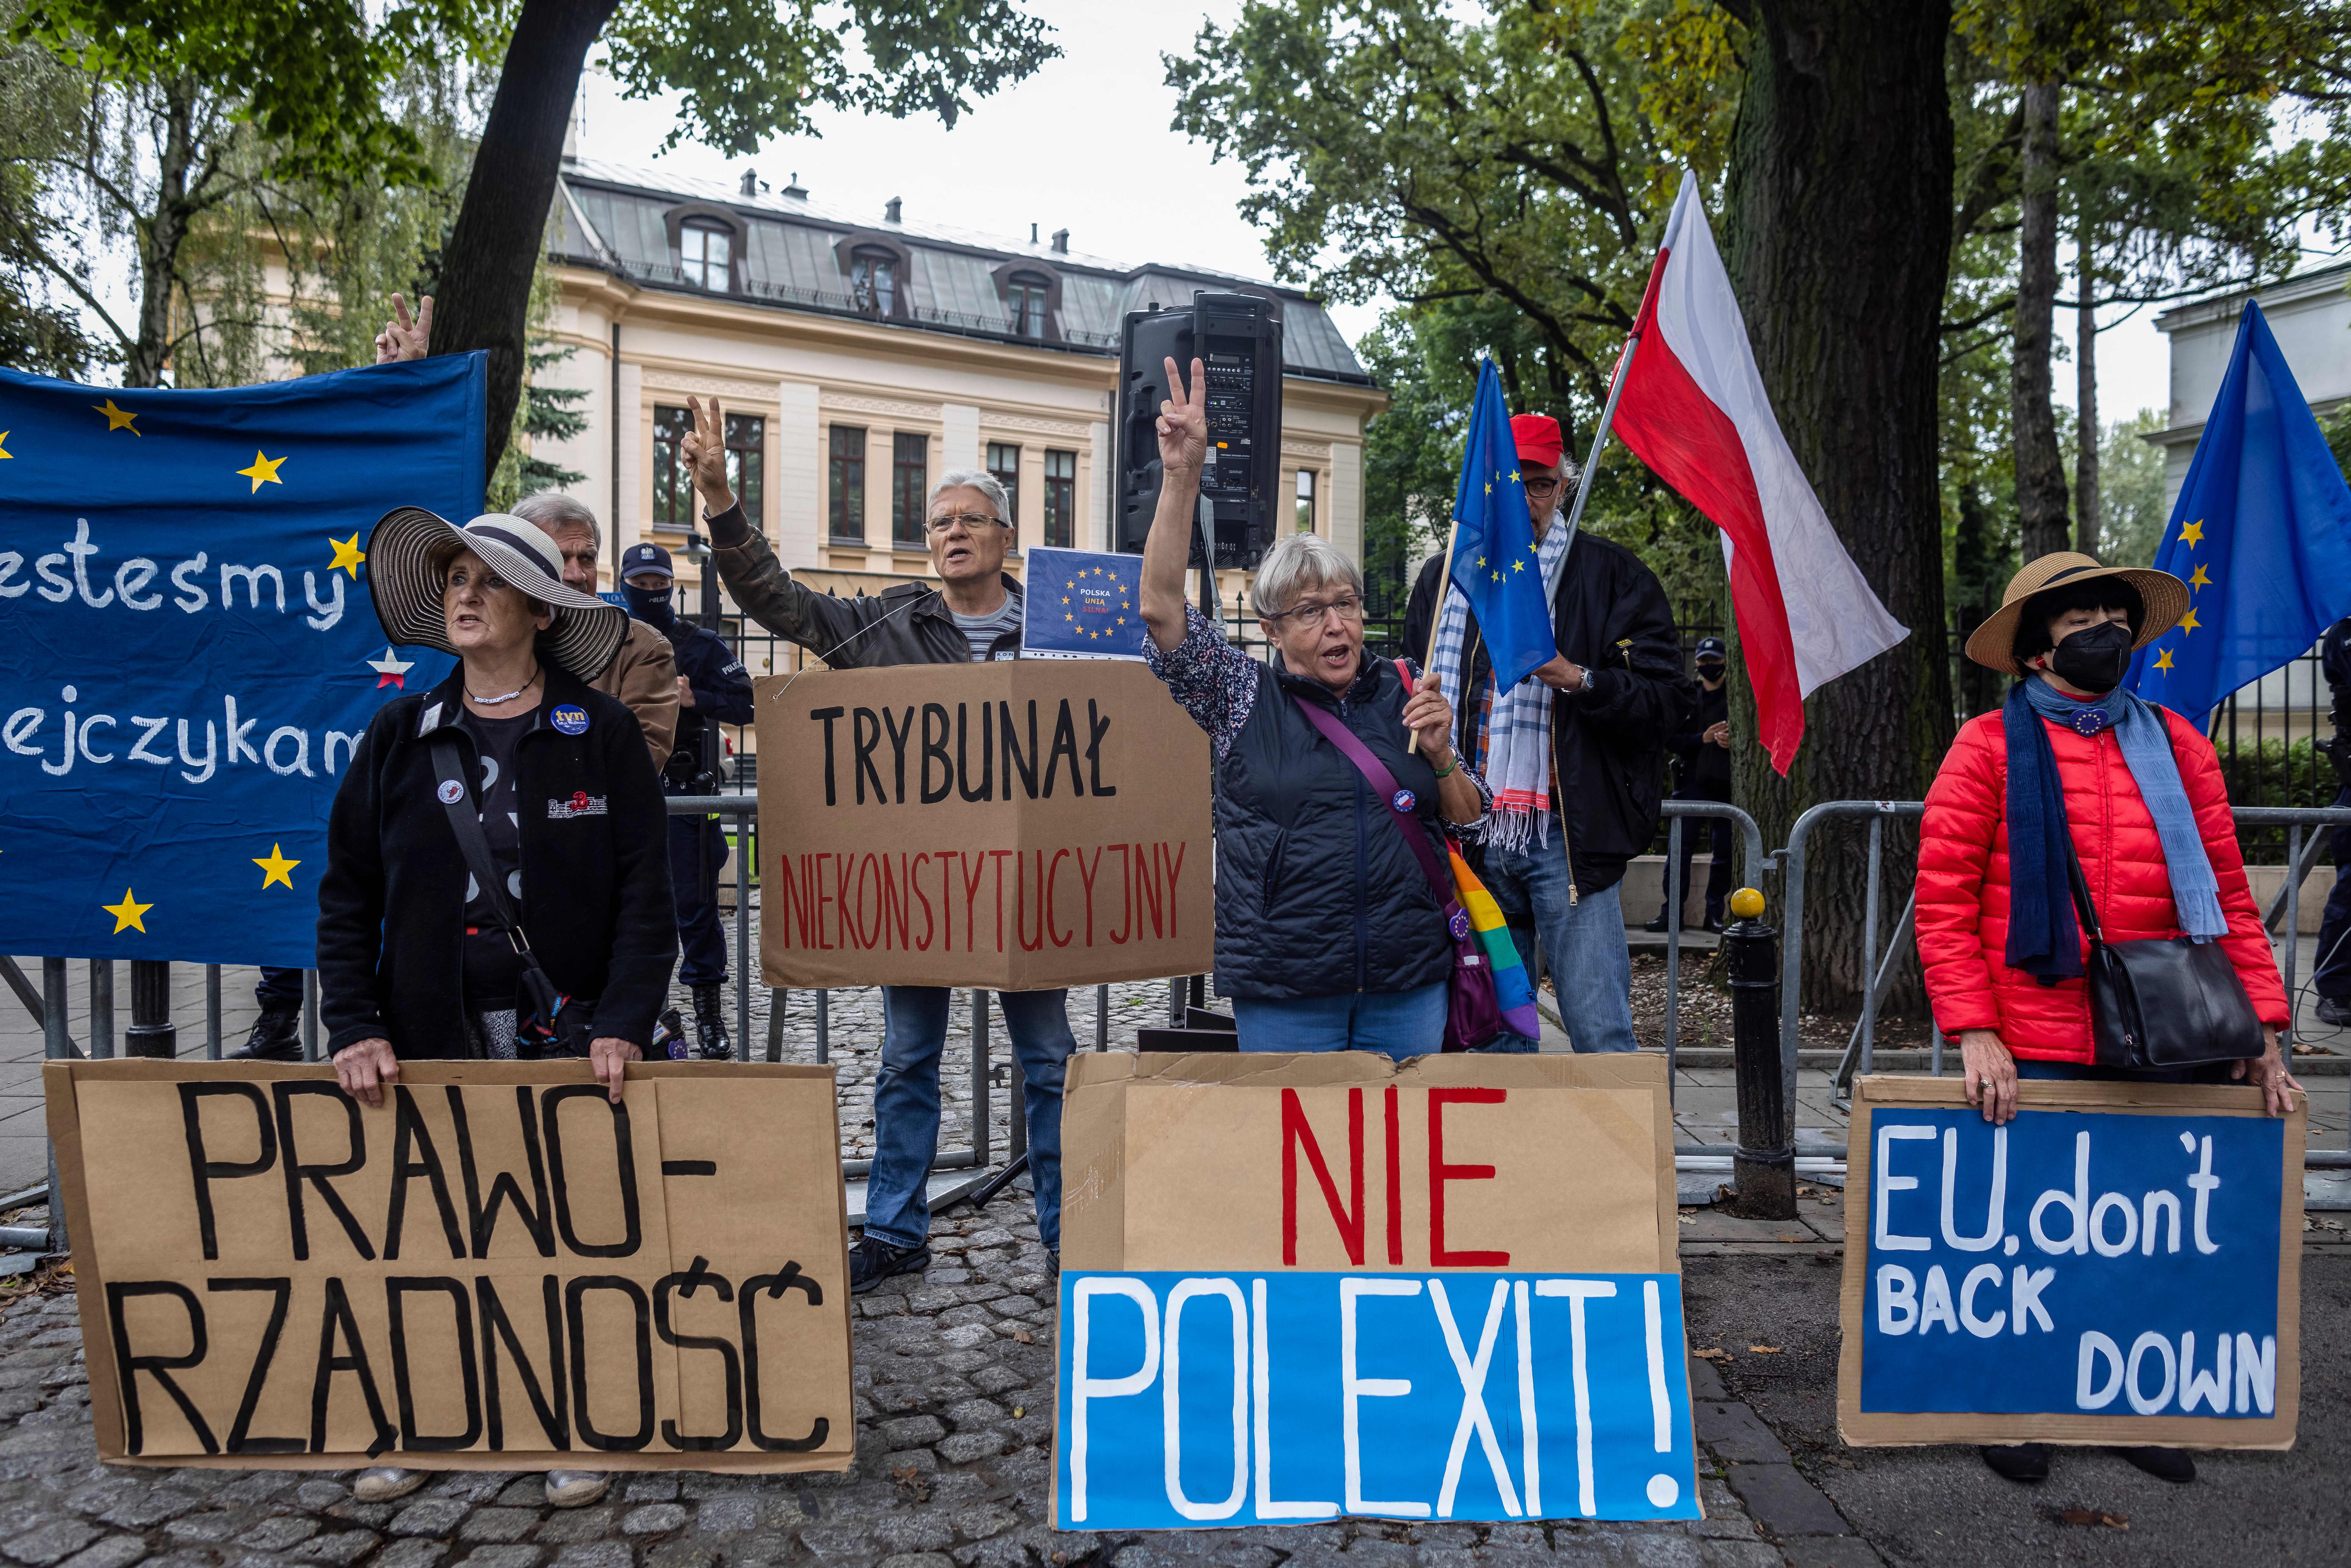 Demonstrators hold banners reading (from L) “Rule of Law”, “Unconstitutional Court”, “No to Polexit” and “EU don’t Back Down” as they take part in a protest in August